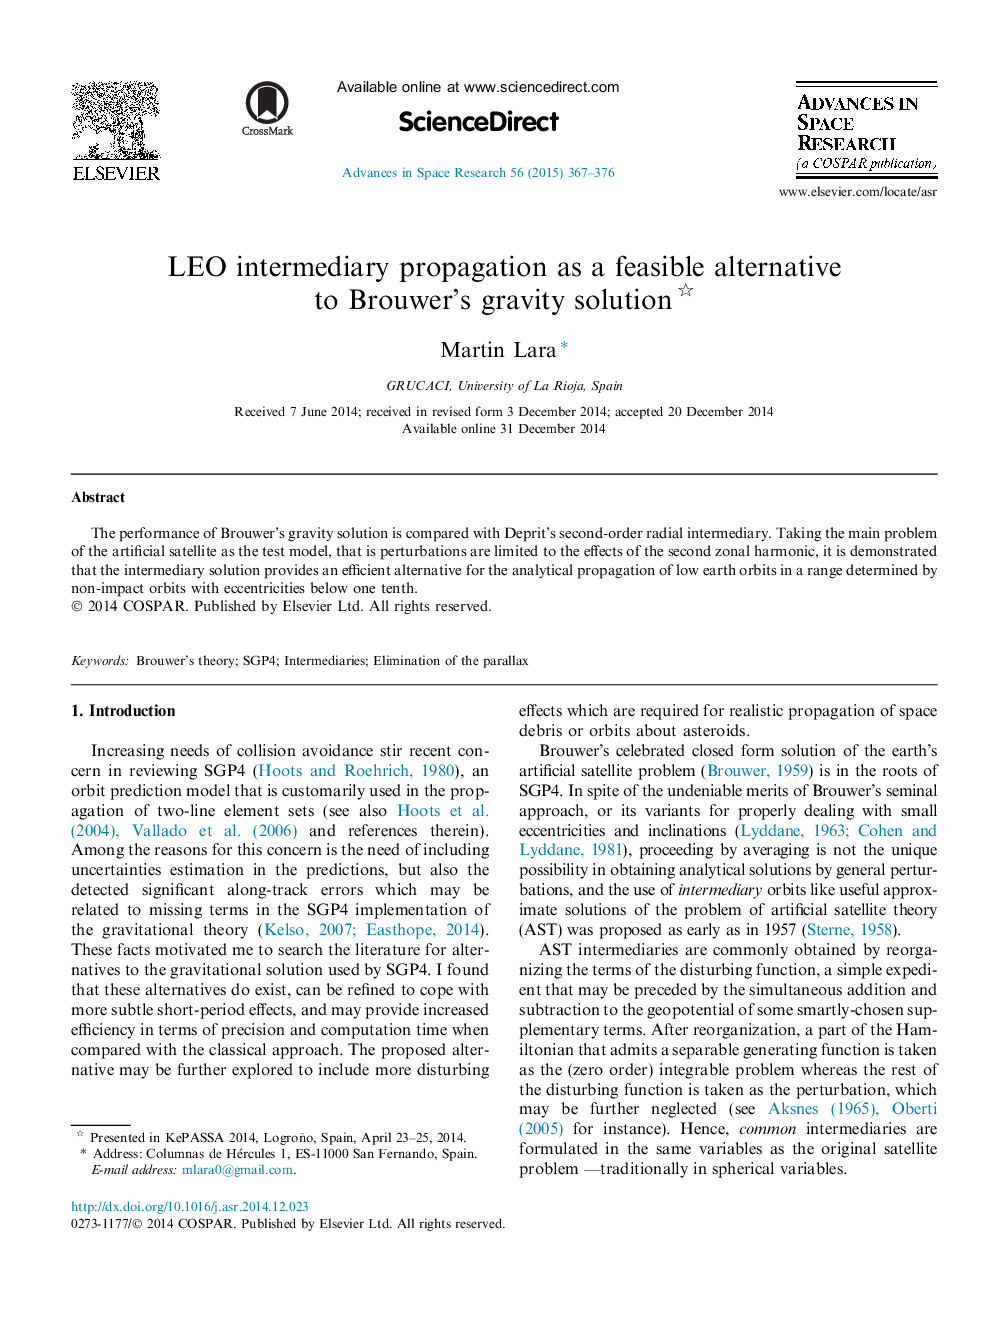 LEO intermediary propagation as a feasible alternative to Brouwer’s gravity solution 